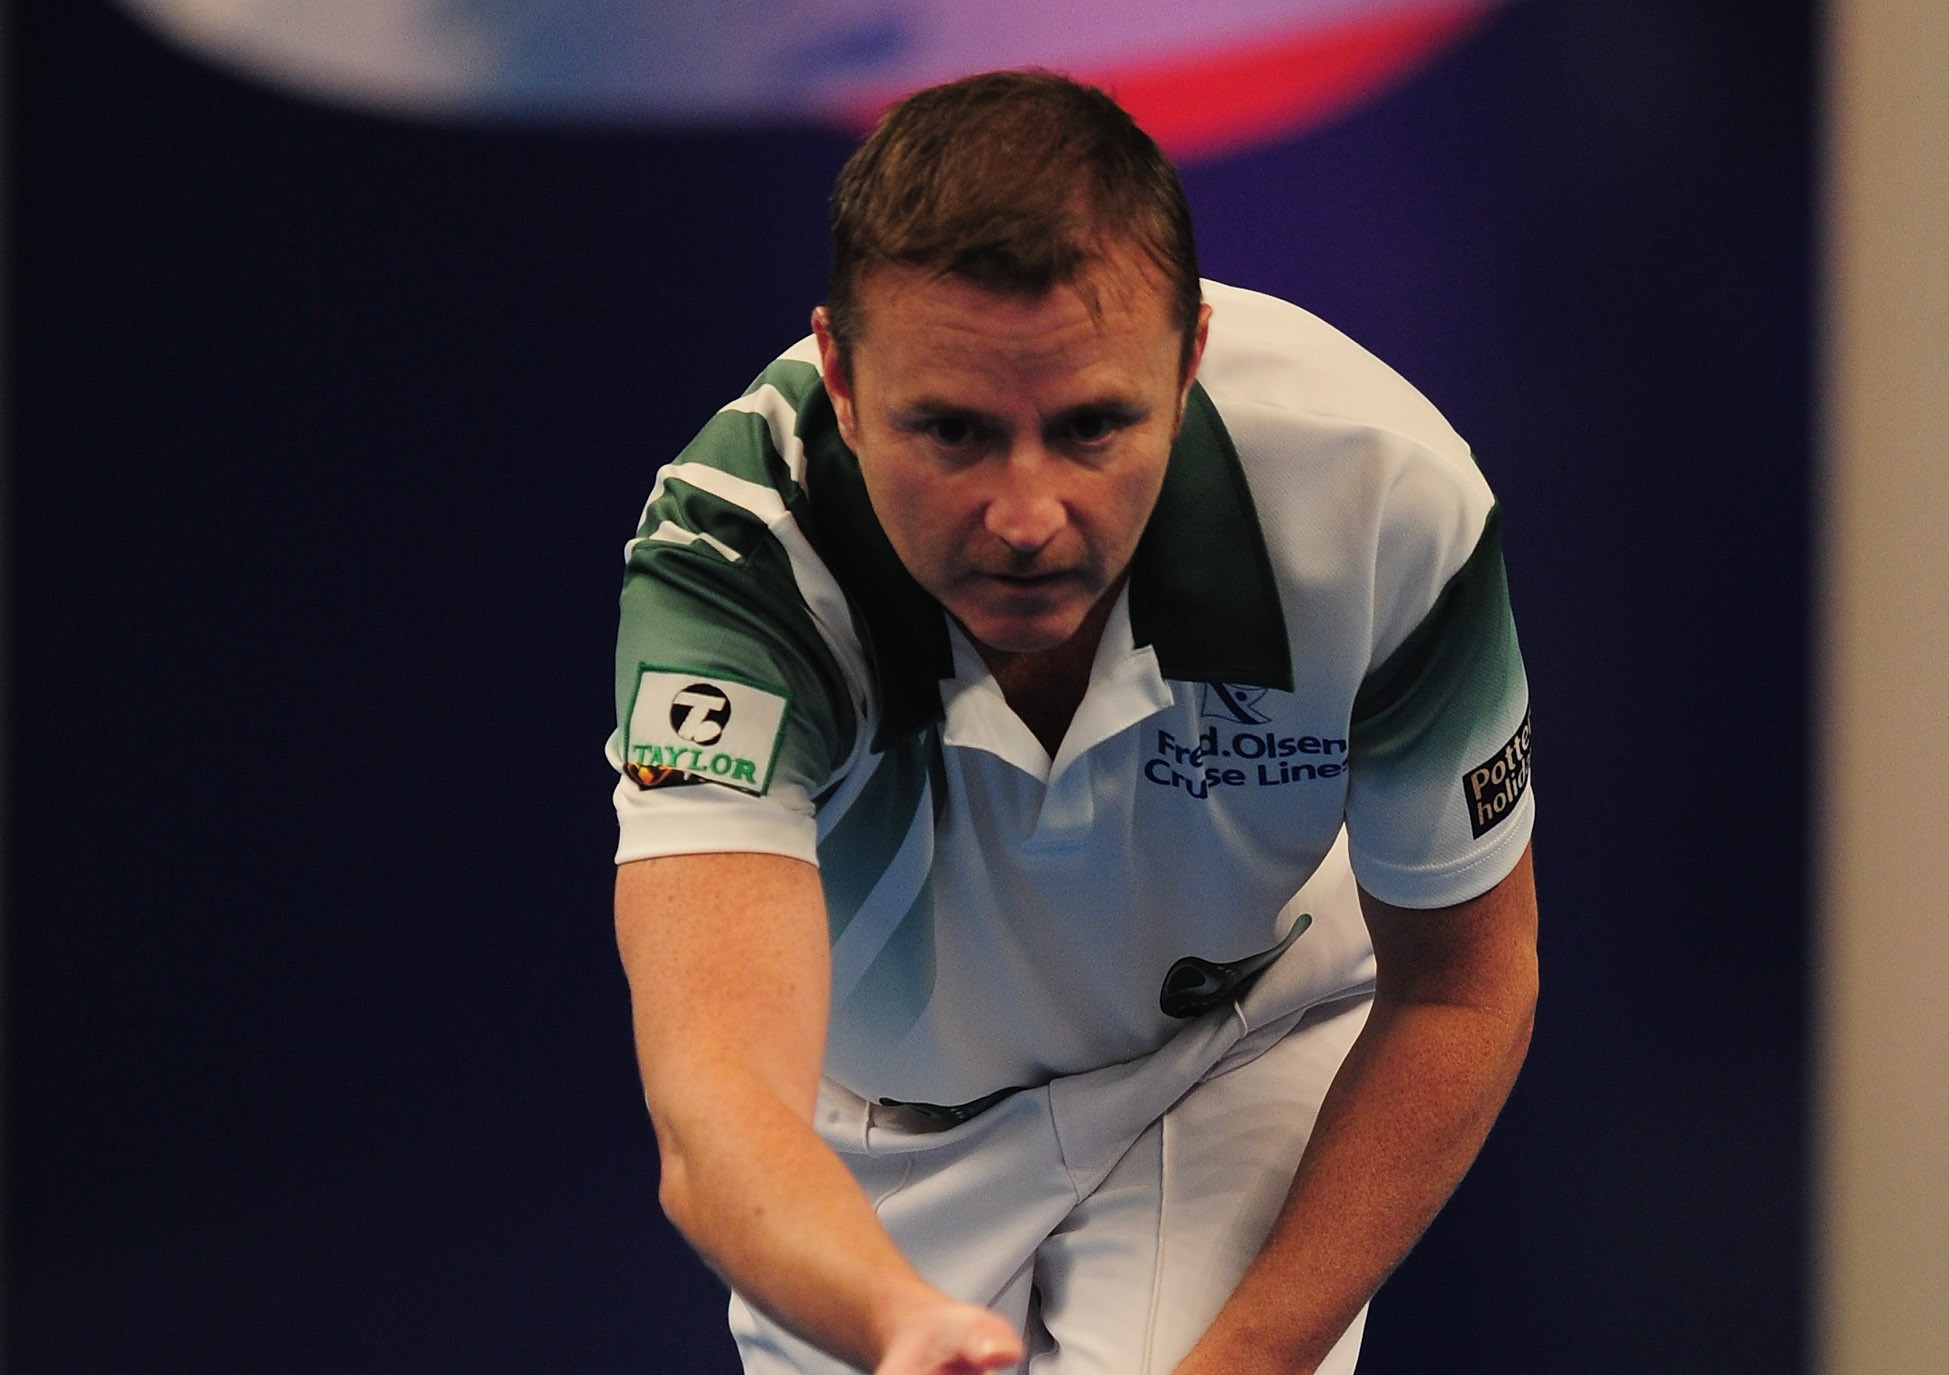 Dawes into open singles final after two catch COVID-19 at World Indoor Bowls Championships